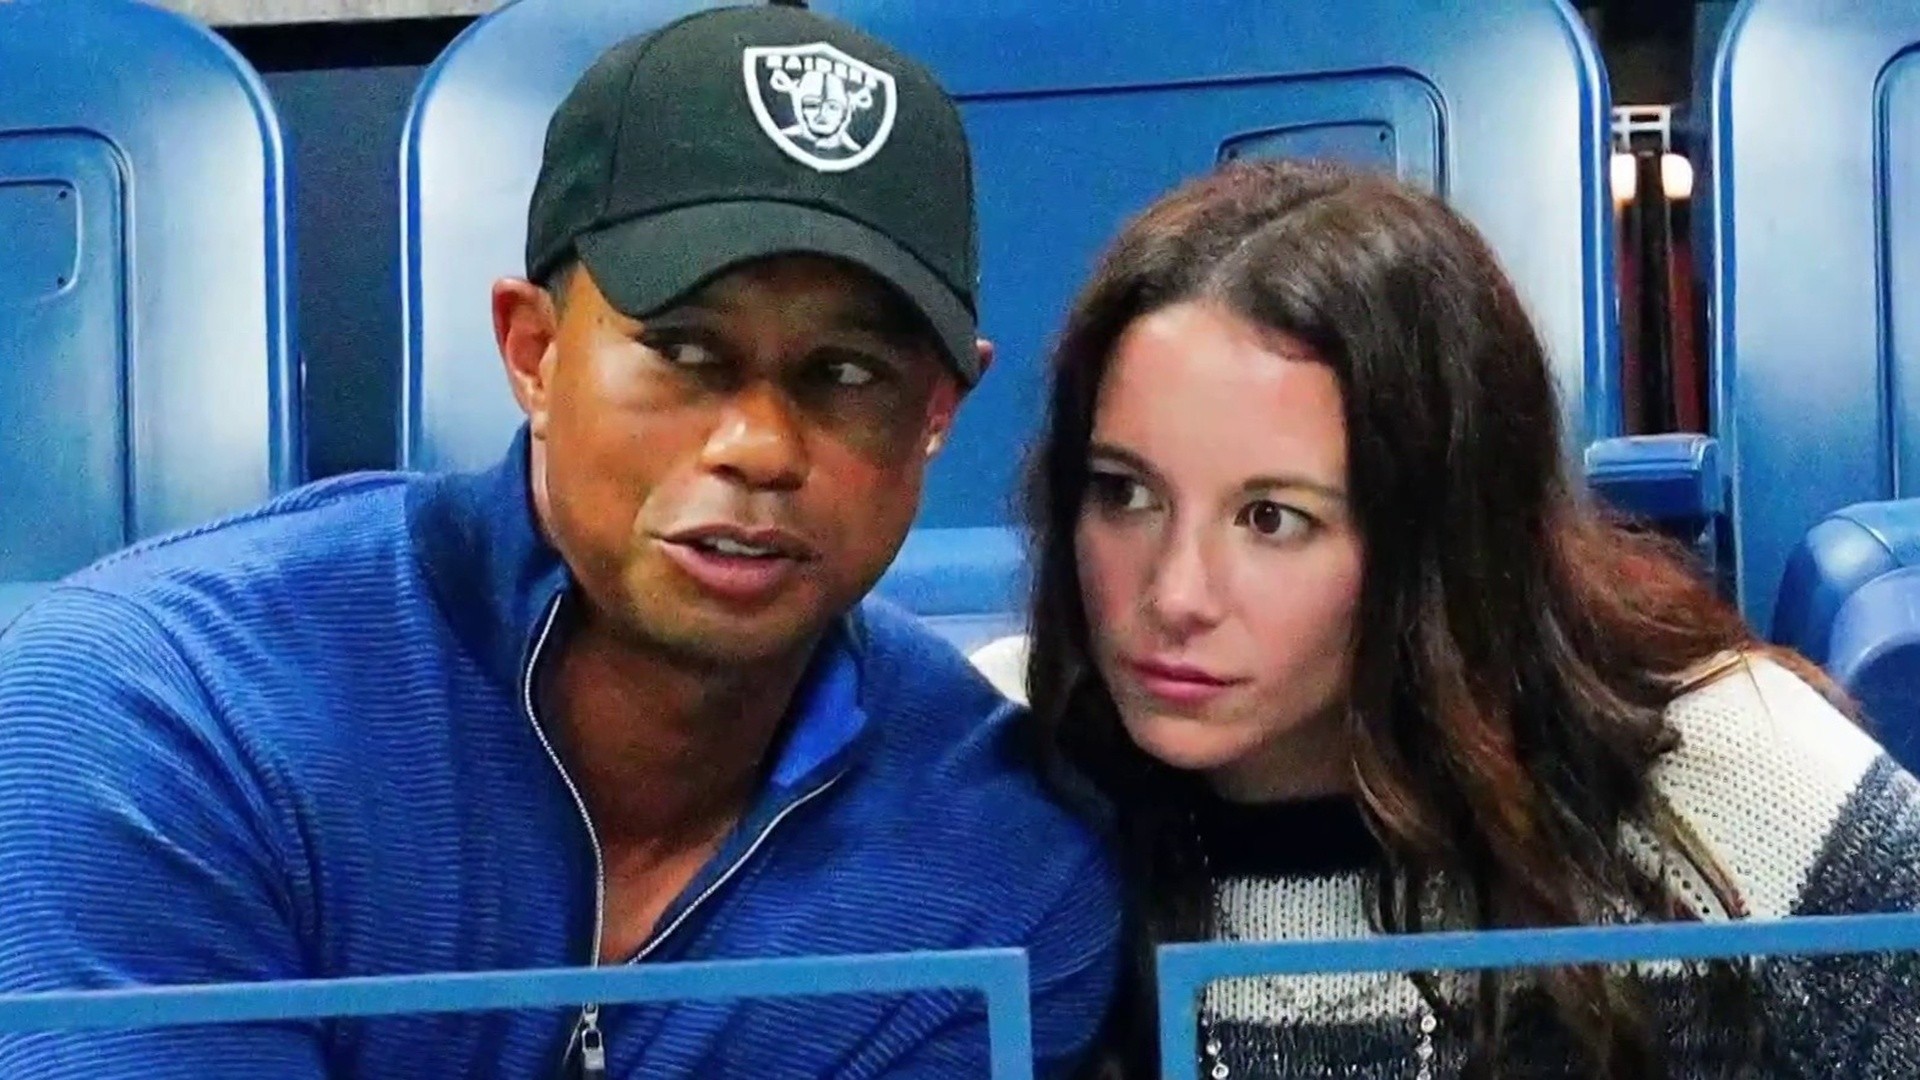 Tiger Woods ex-girlfriend alleges sexual harassment in court docs image